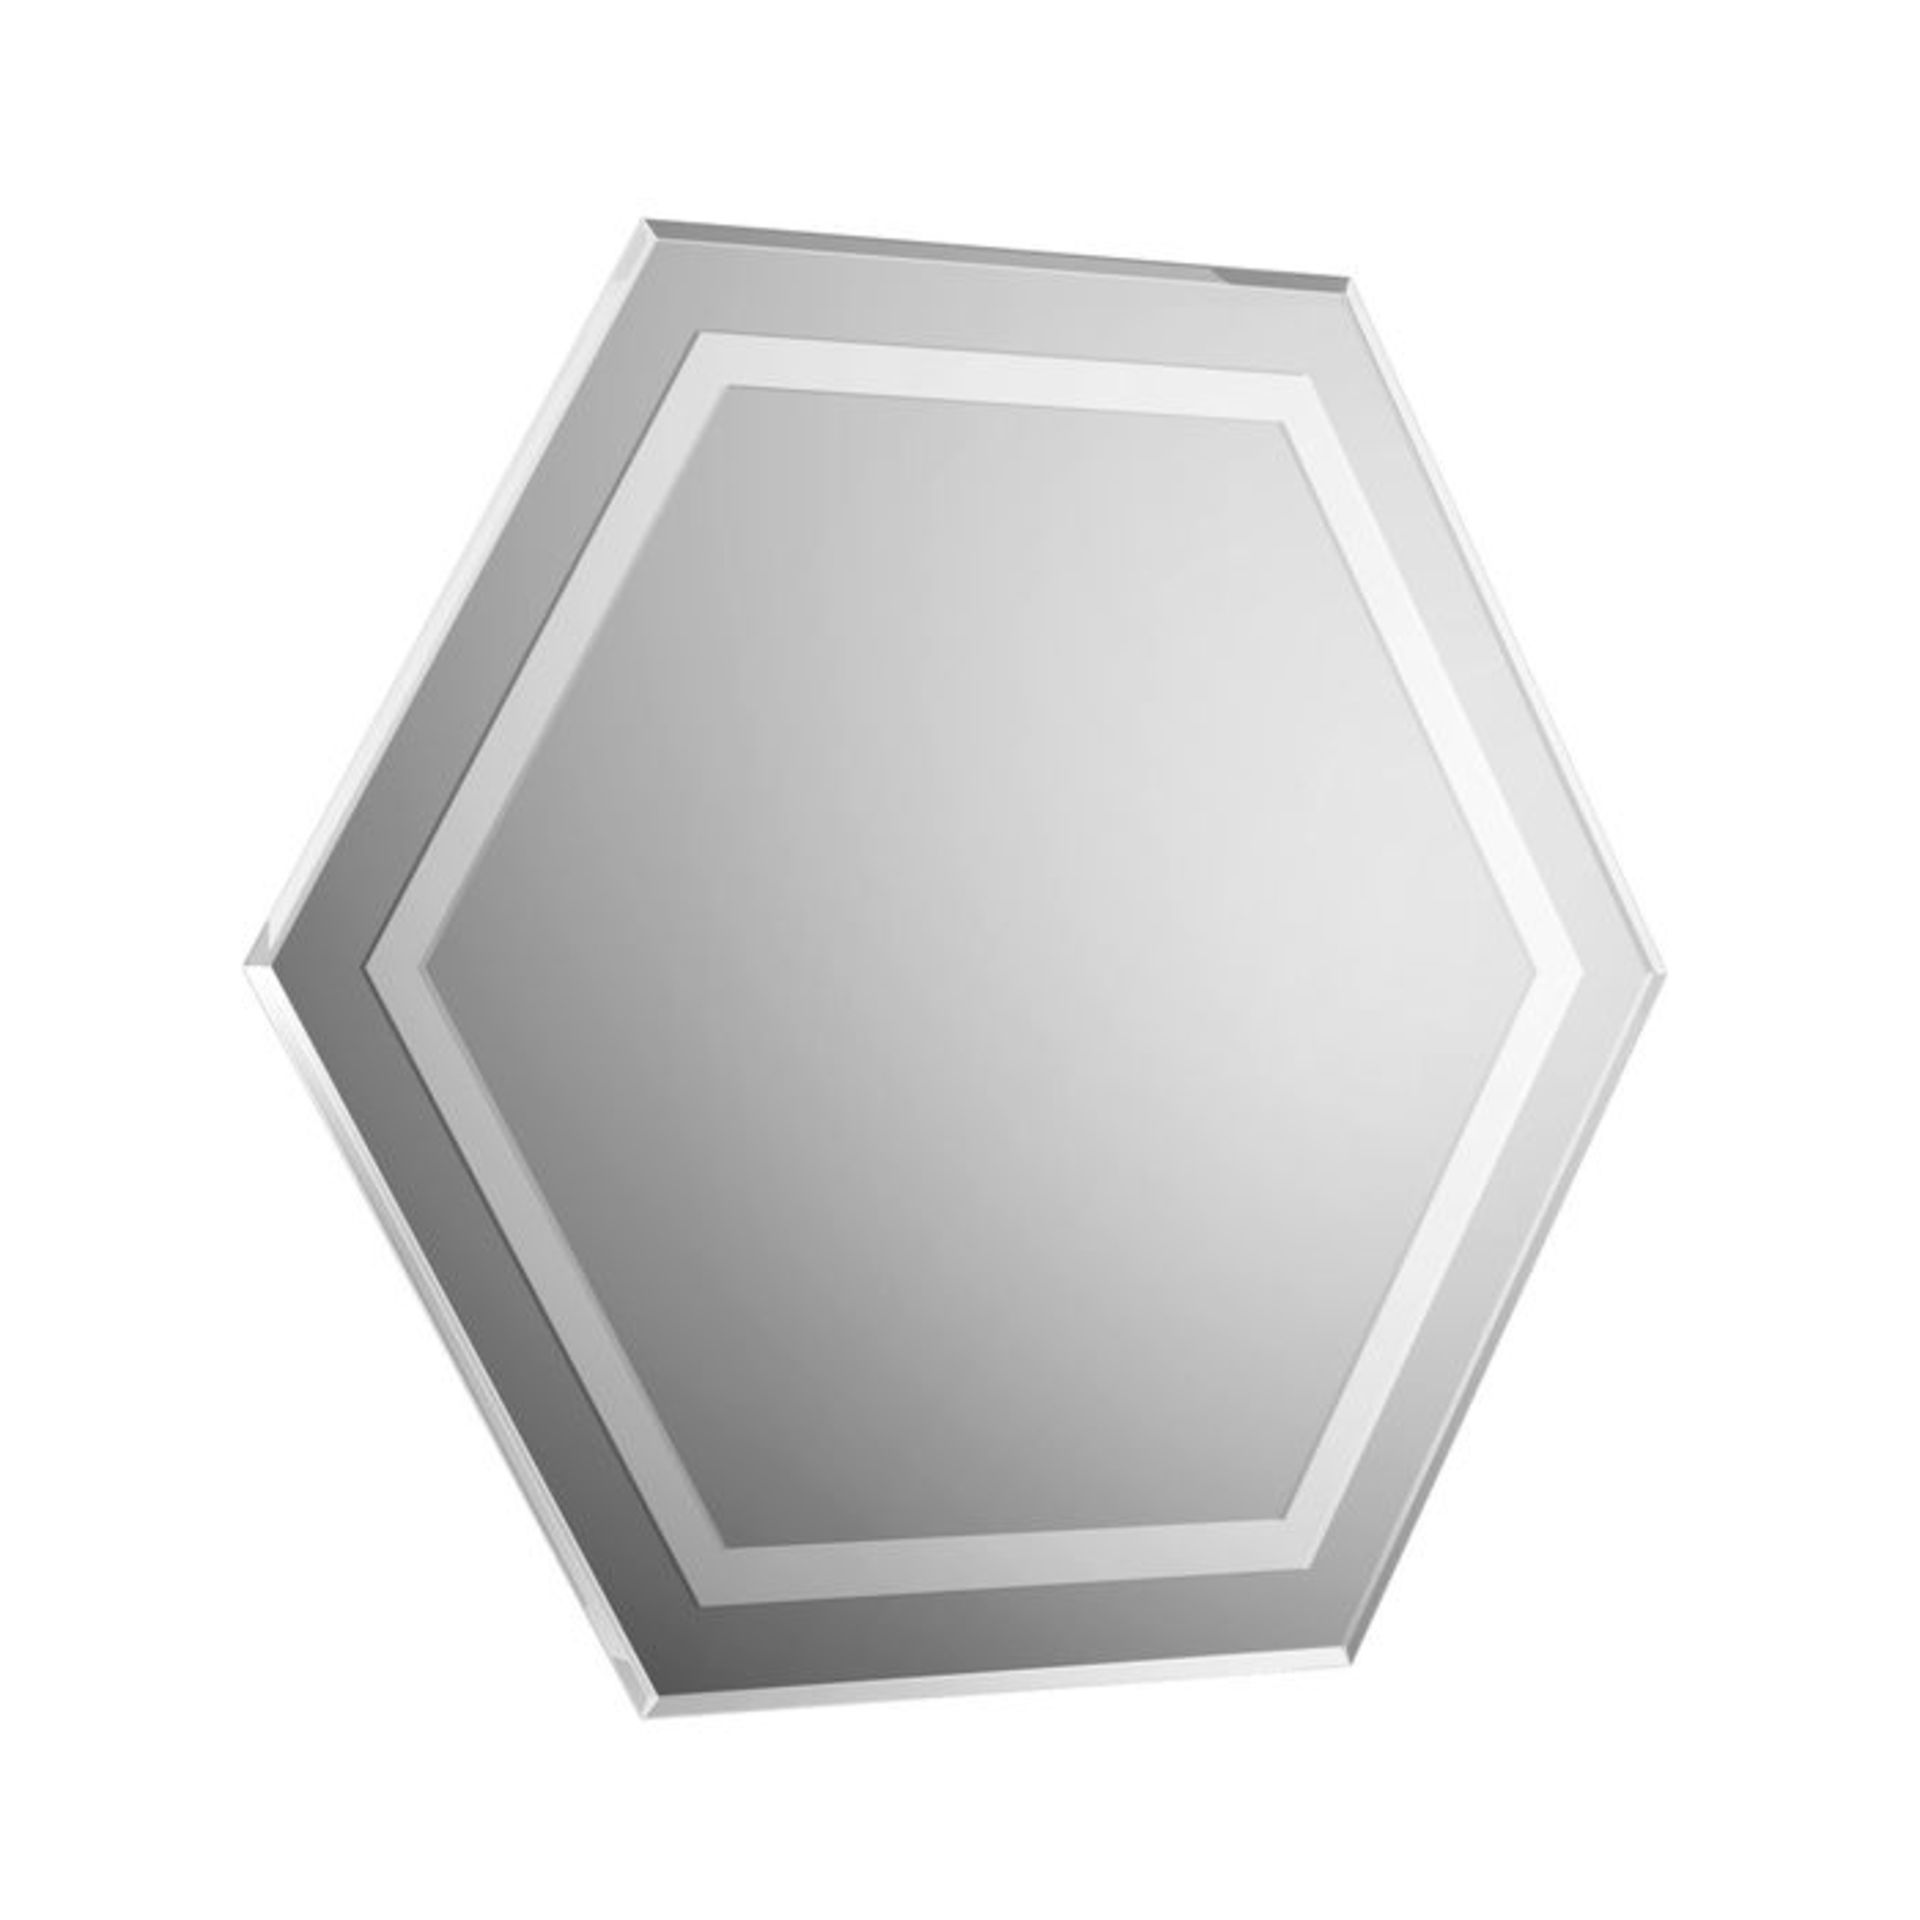 (P68) Beveled Hex Mirror 800x800mm. Introducing The Hotel Collection - Modern Glamour Statement - Image 4 of 4